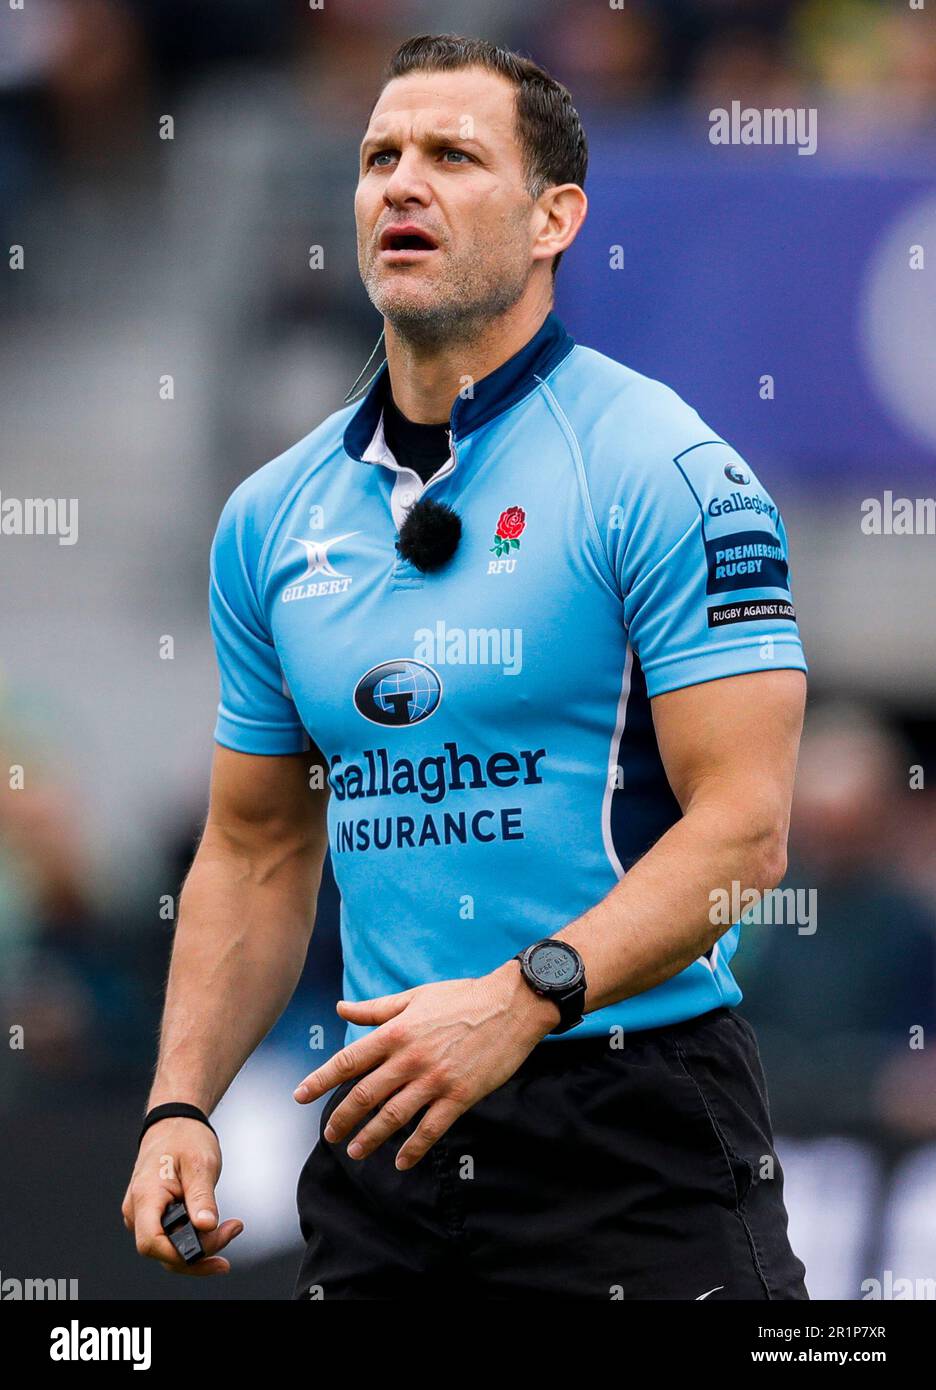 Referee Karl Dickson during the Gallagher Premiership play-off semi-final match at the StoneX Stadium, London